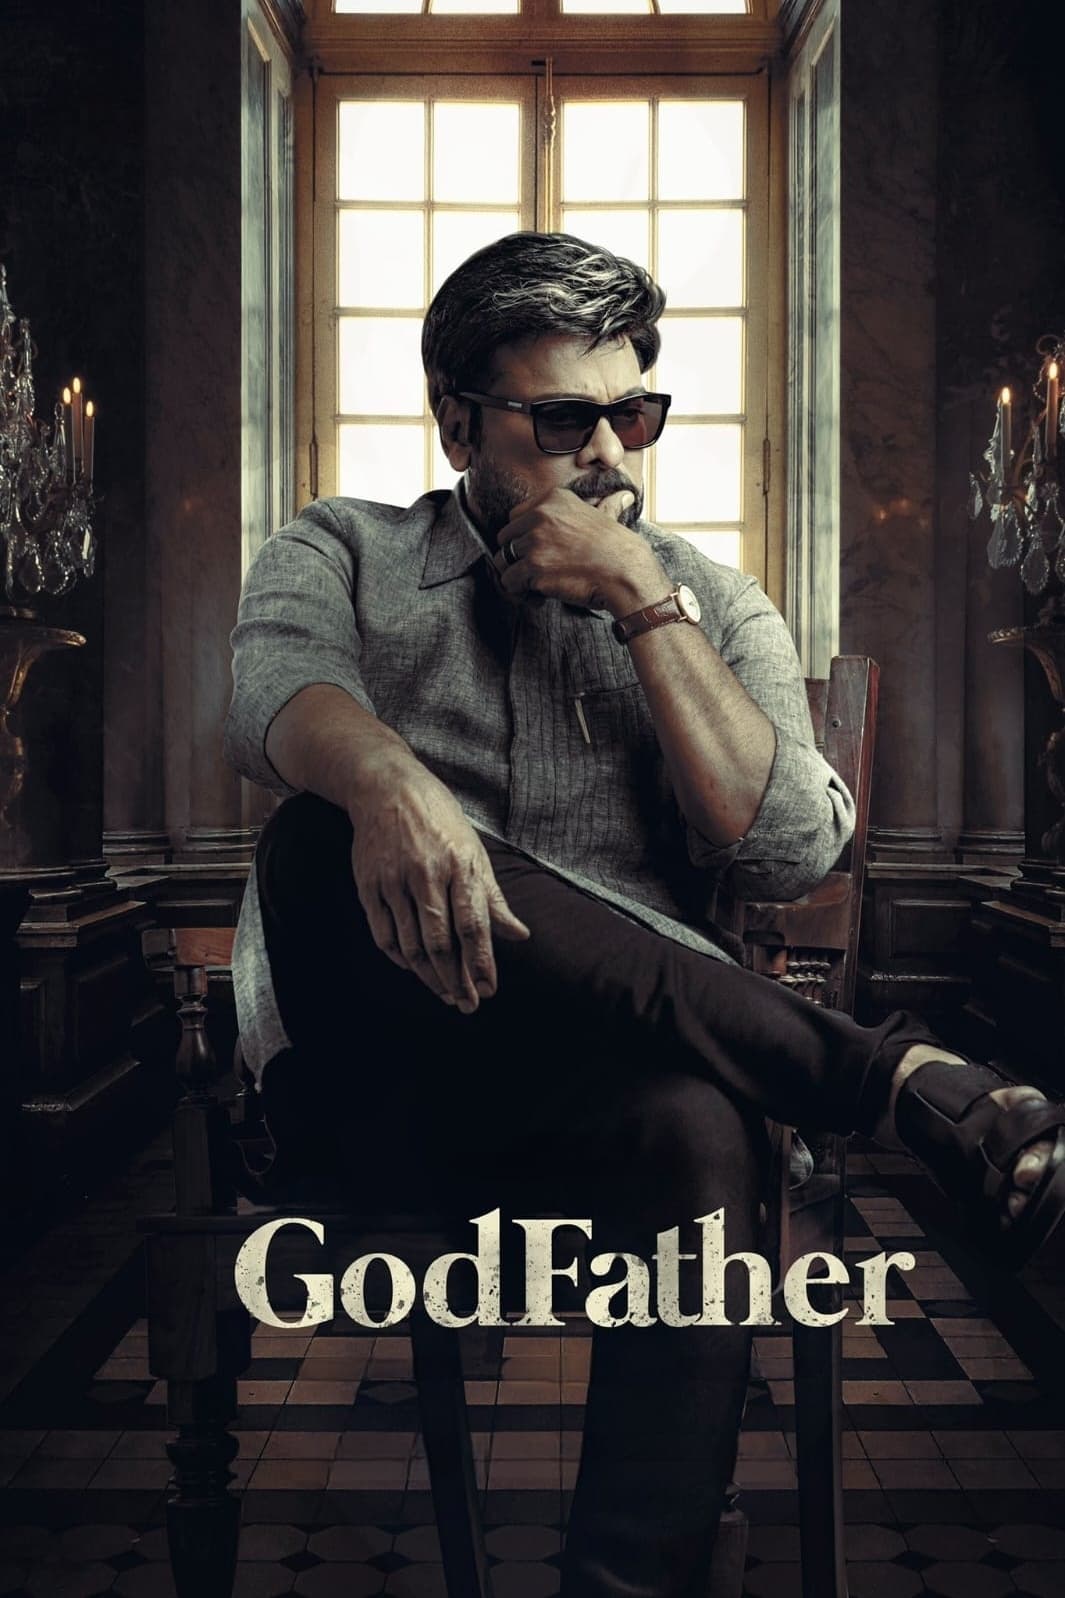 Poster for the movie "Godfather"